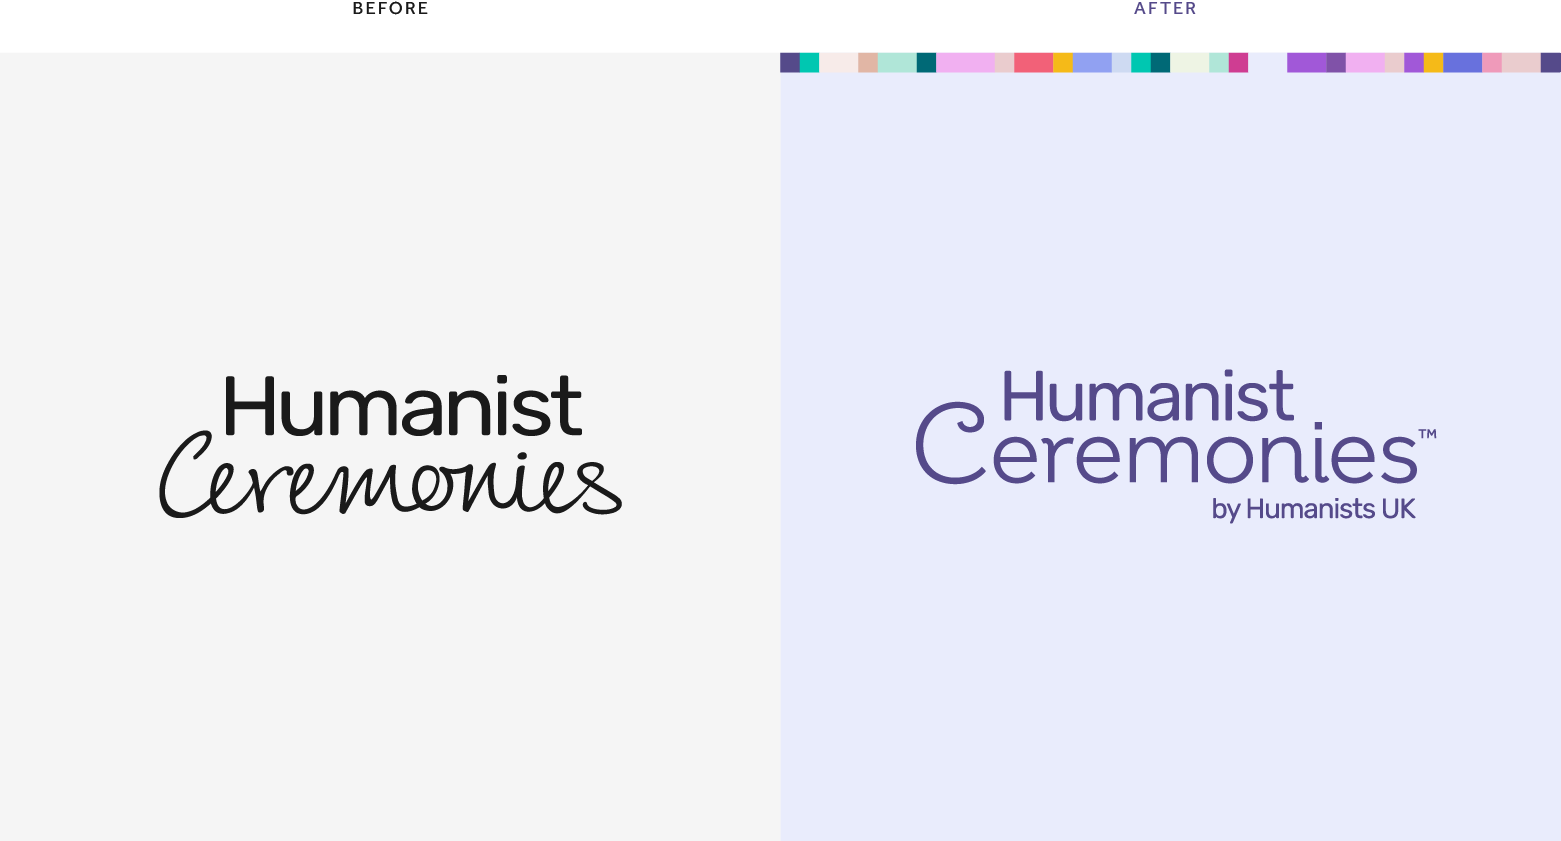 Humanist Ceremonies logo before and after